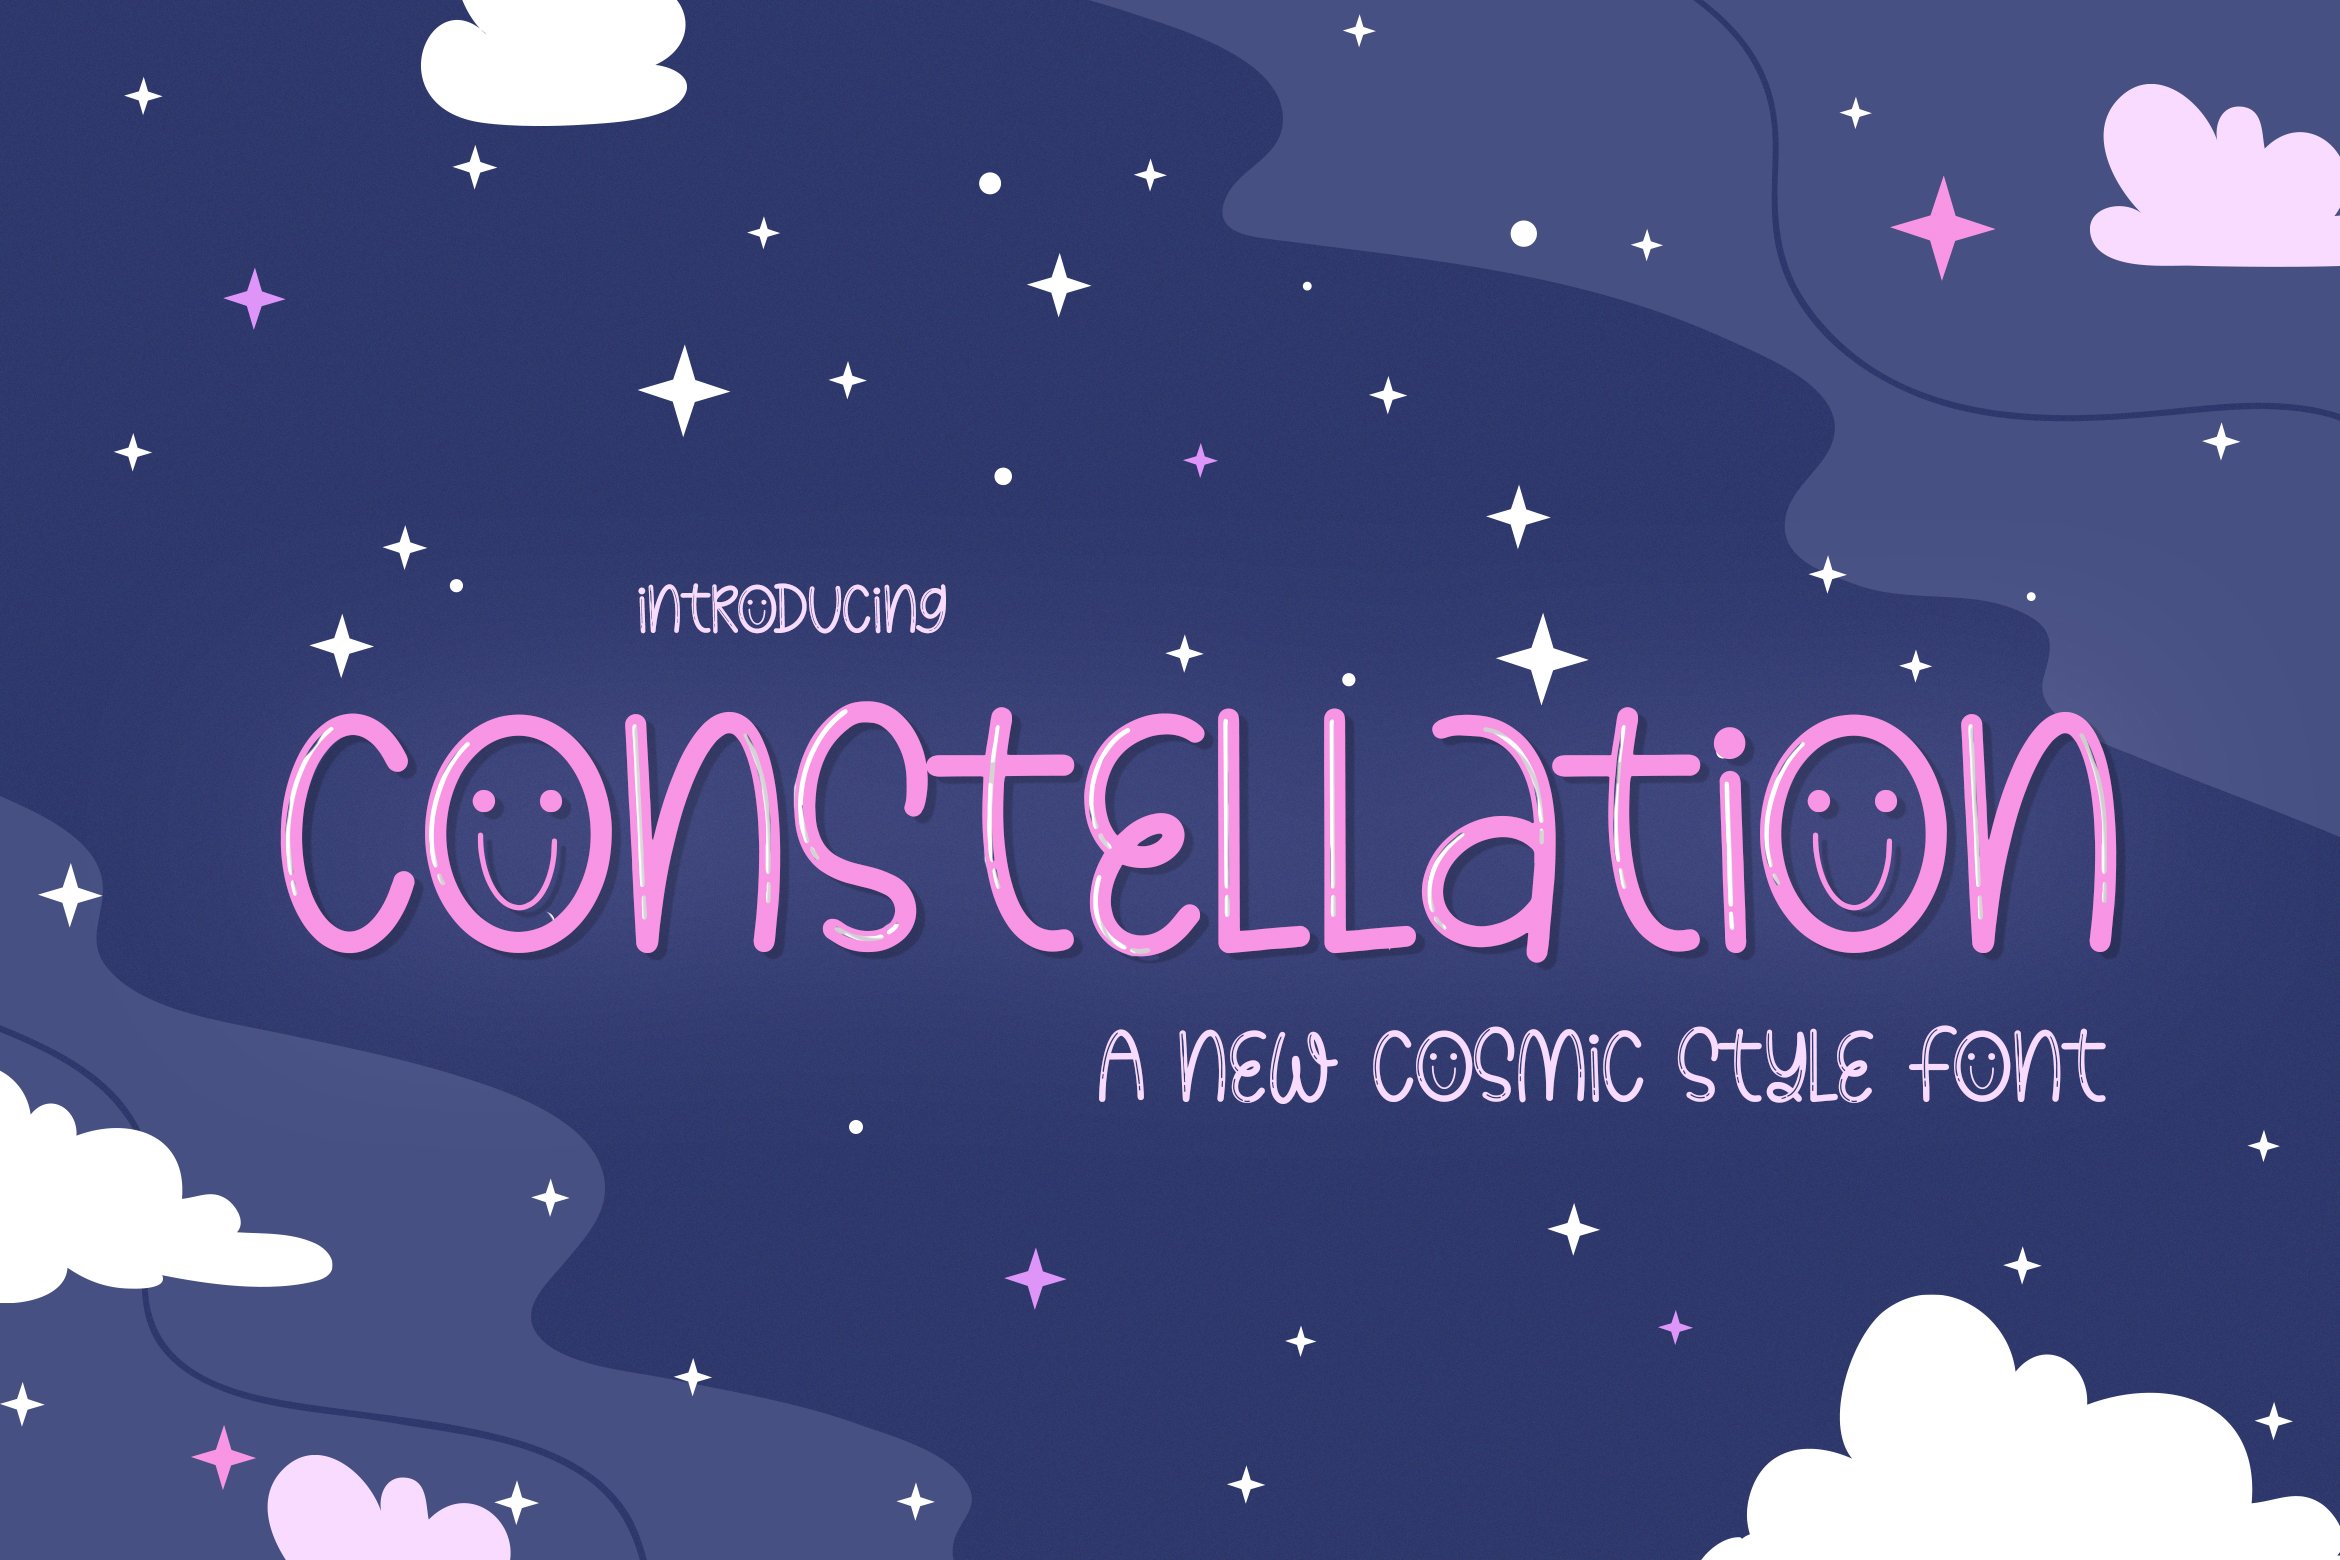 Constellation Font cover image.